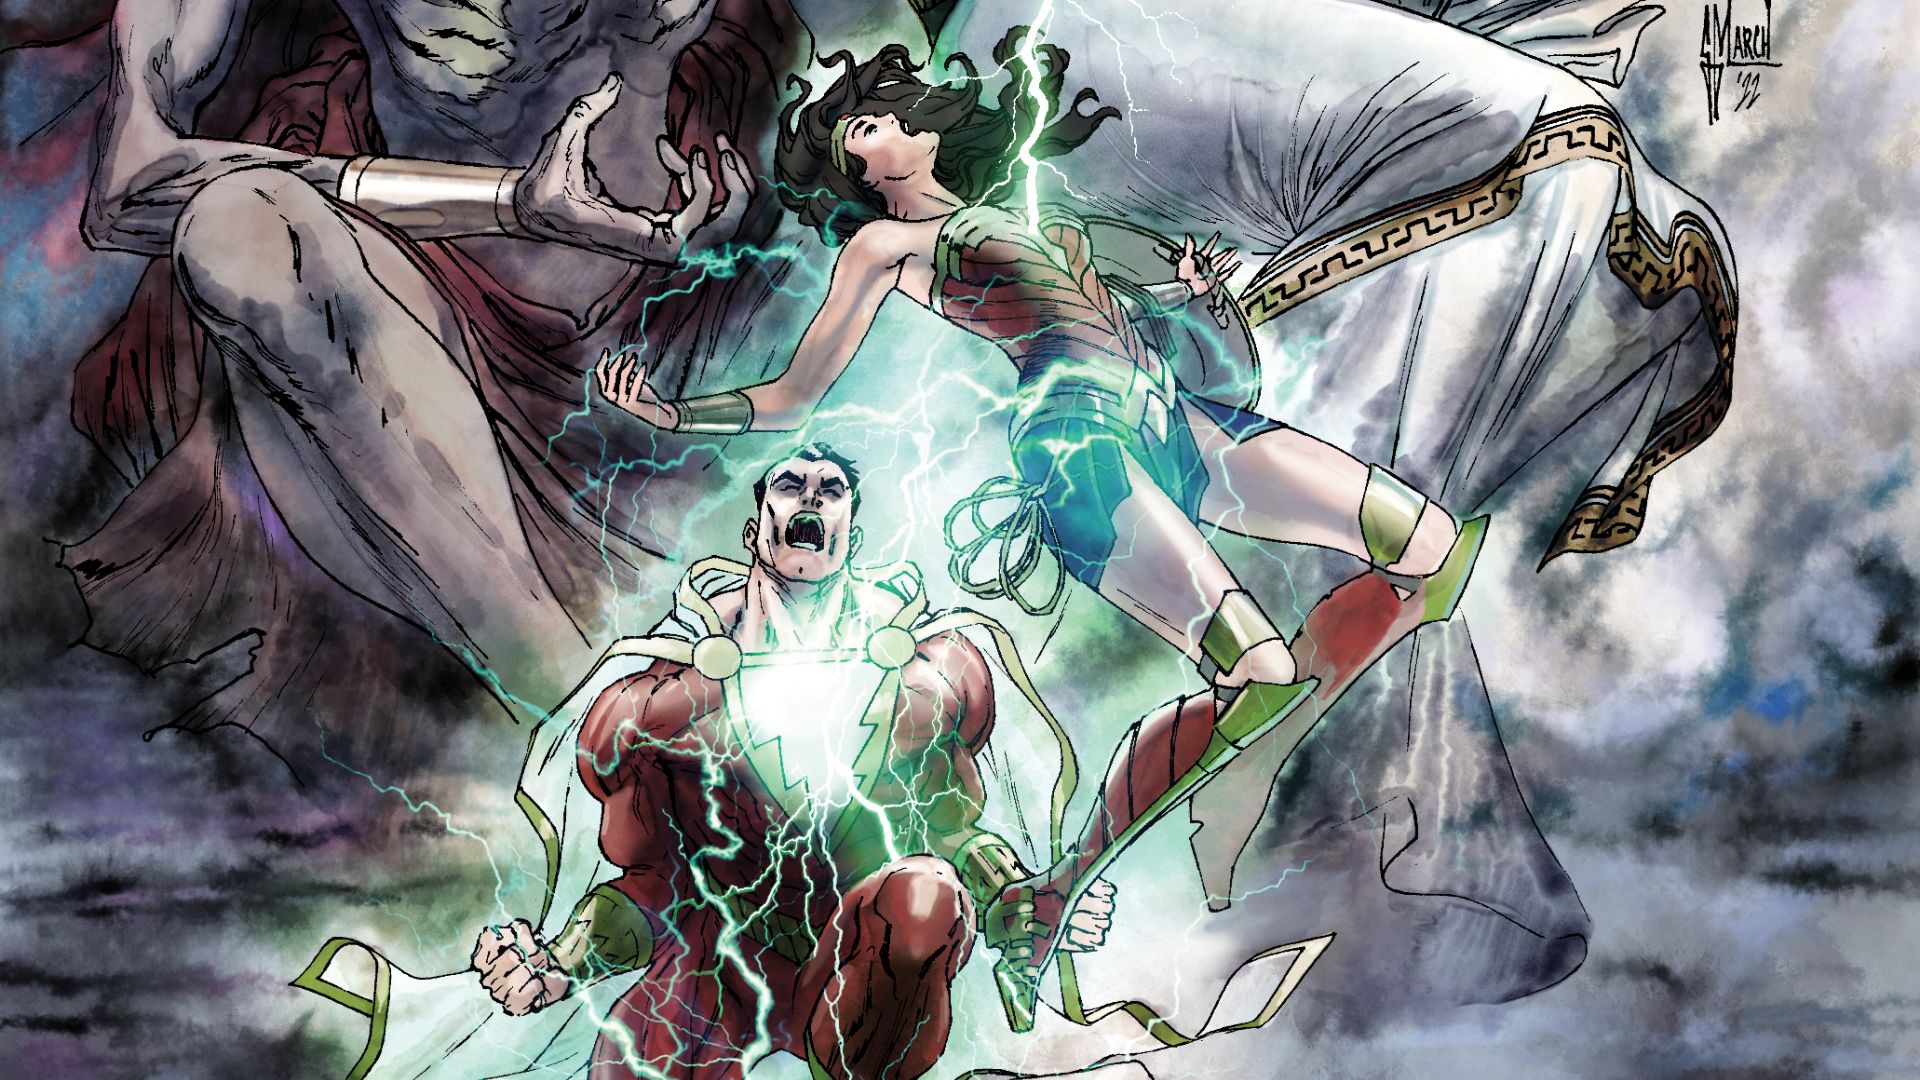 Is Wonder Woman in 'Shazam! Fury of the Gods'?